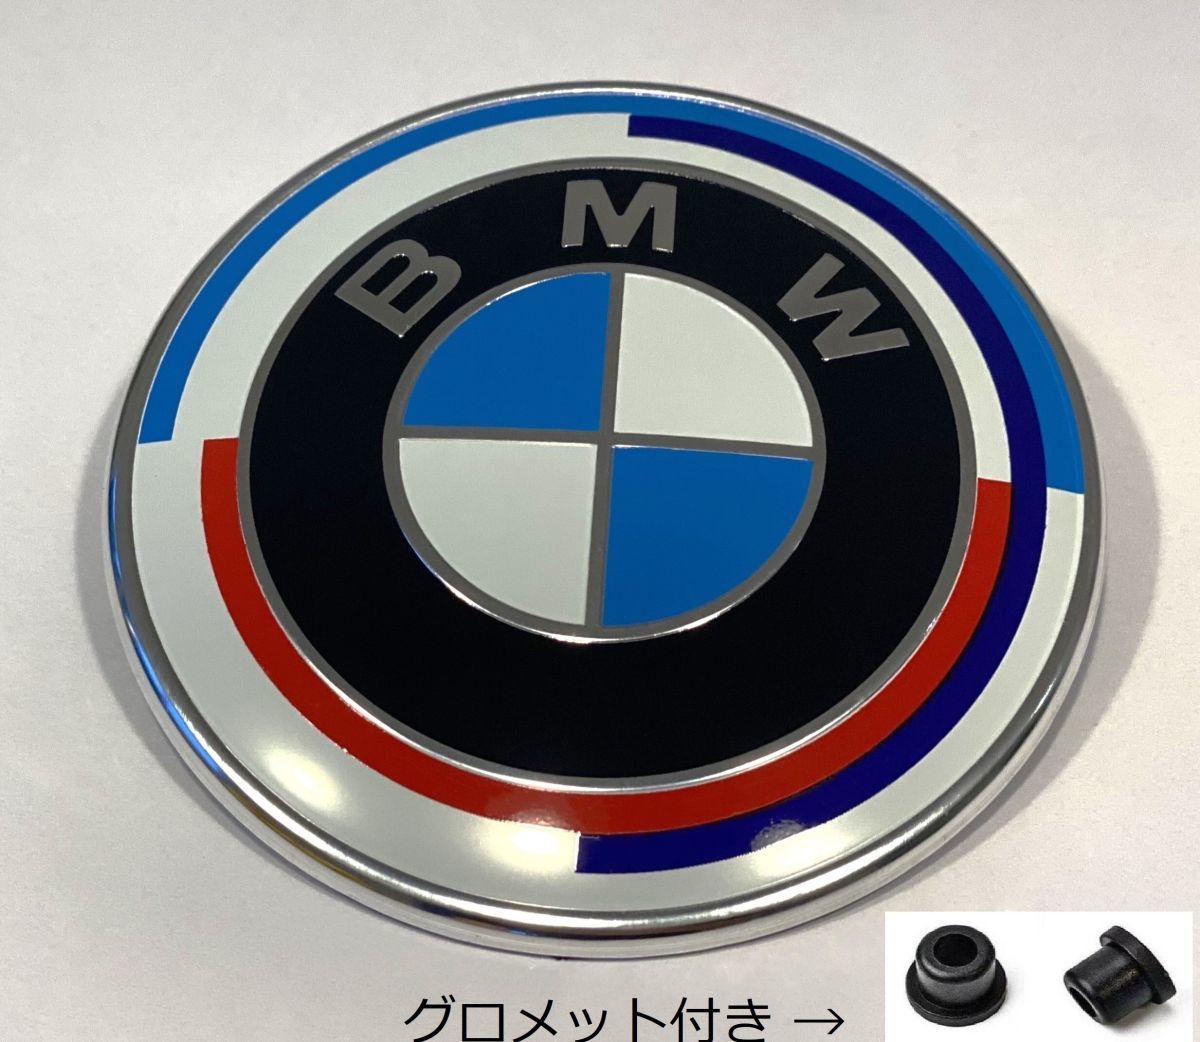 BMW emblem 82mm 50 anniversary grommet attaching prevention film attaching bonnet trunk new goods unused free shipping 